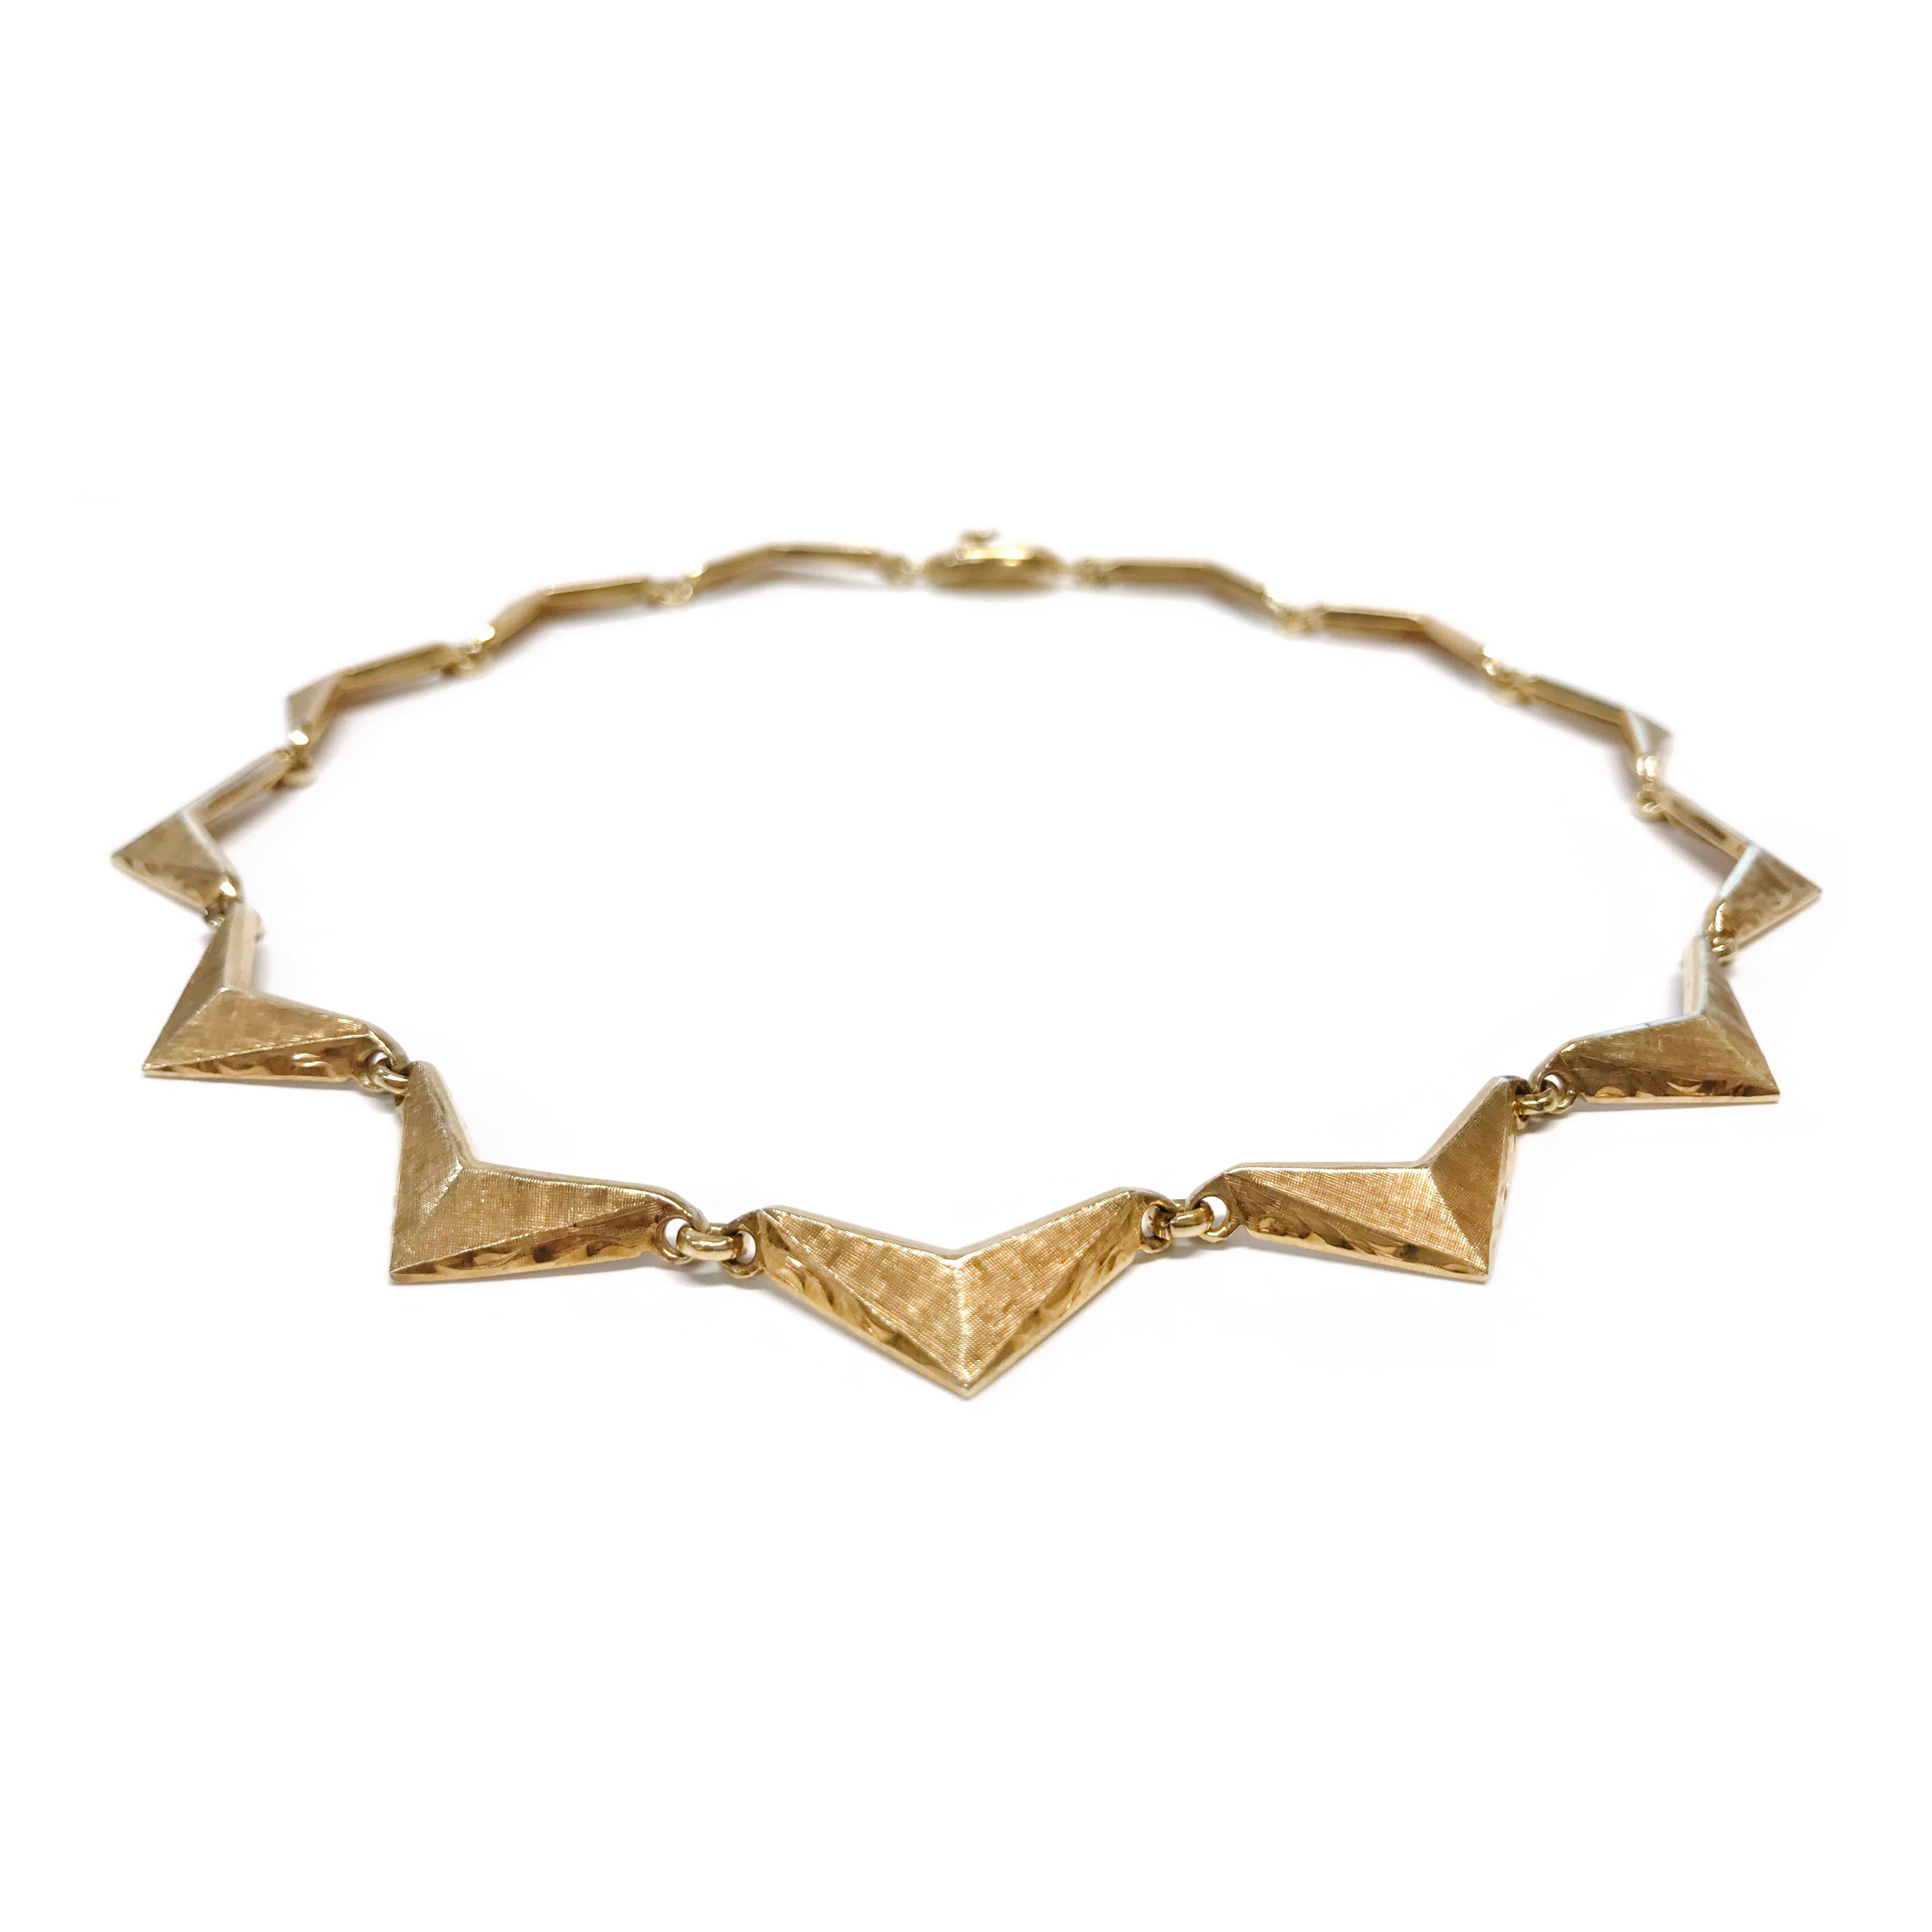 14 Karat Gold Triangle/Chevron Link Necklace. The necklace consists of thirteen gold triangles linked together. The triangles have a Florentine finish on the front and smooth shiny finish on the sides and back. Stamped on the inside of the clasp is